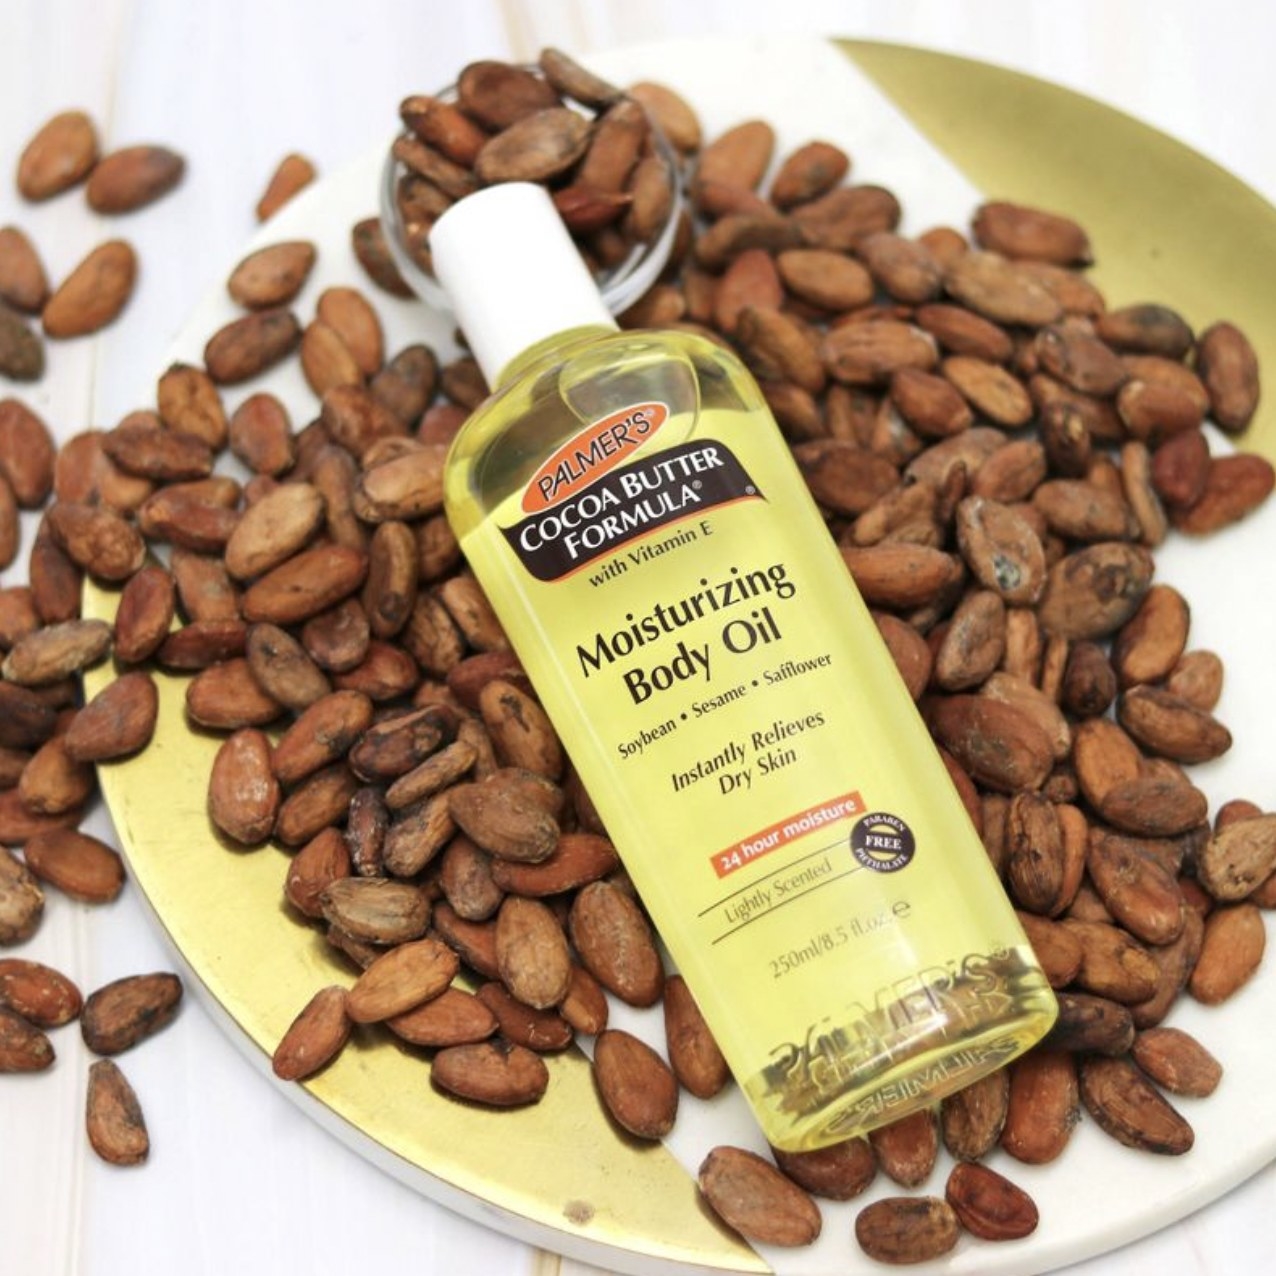 A bottle of body oil laid on top of beans in a plate